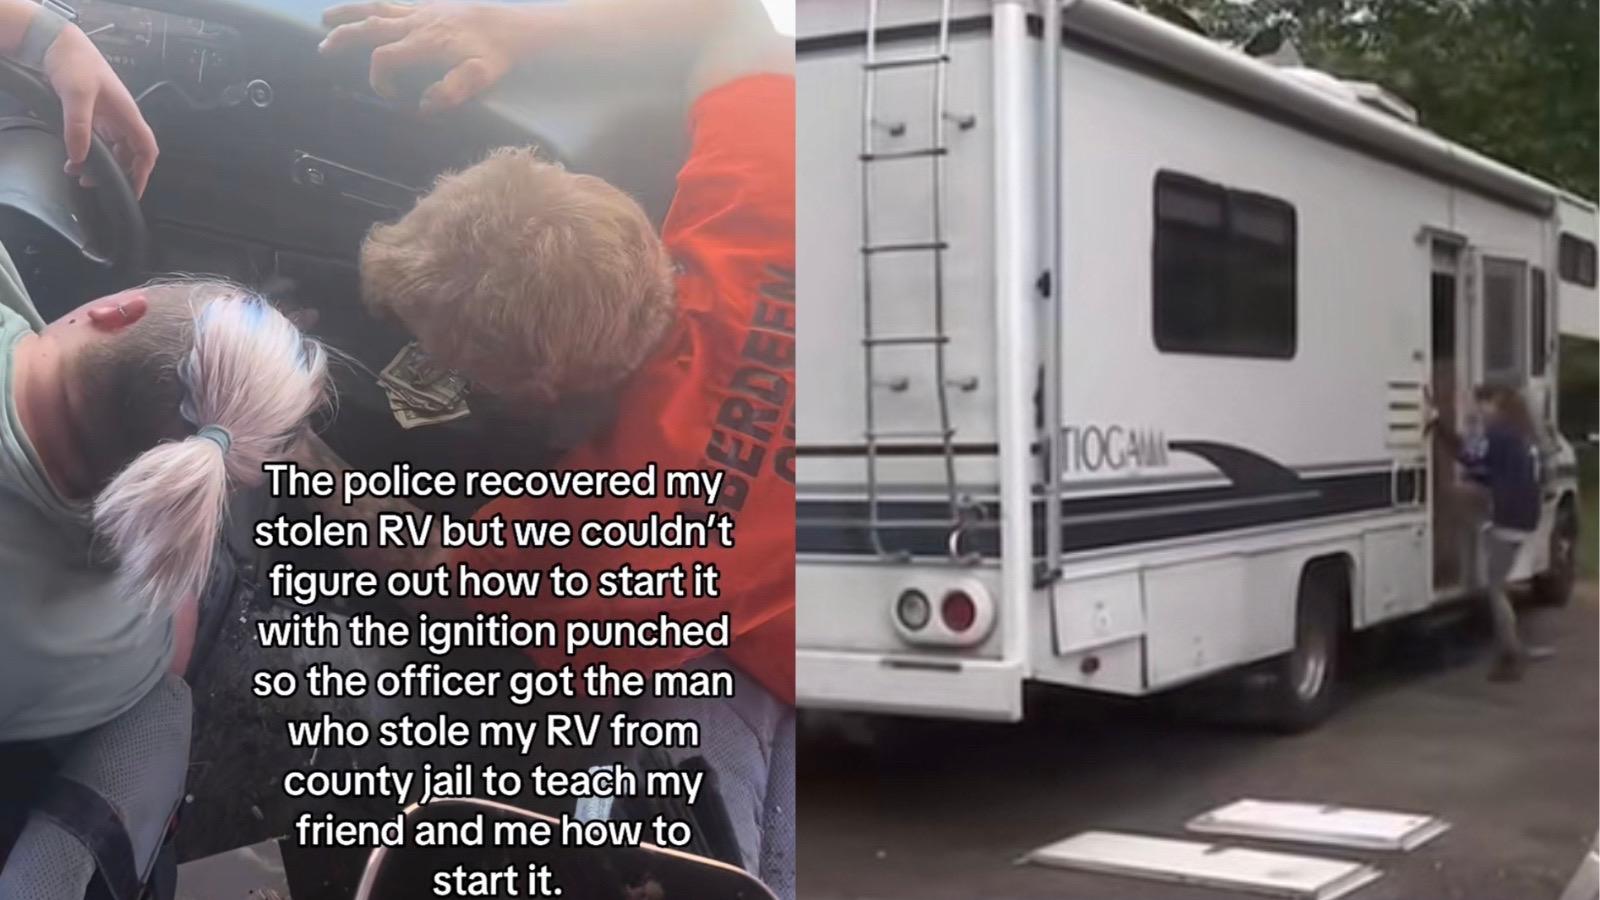 inmate released from jail to start woman's RV after he stole it